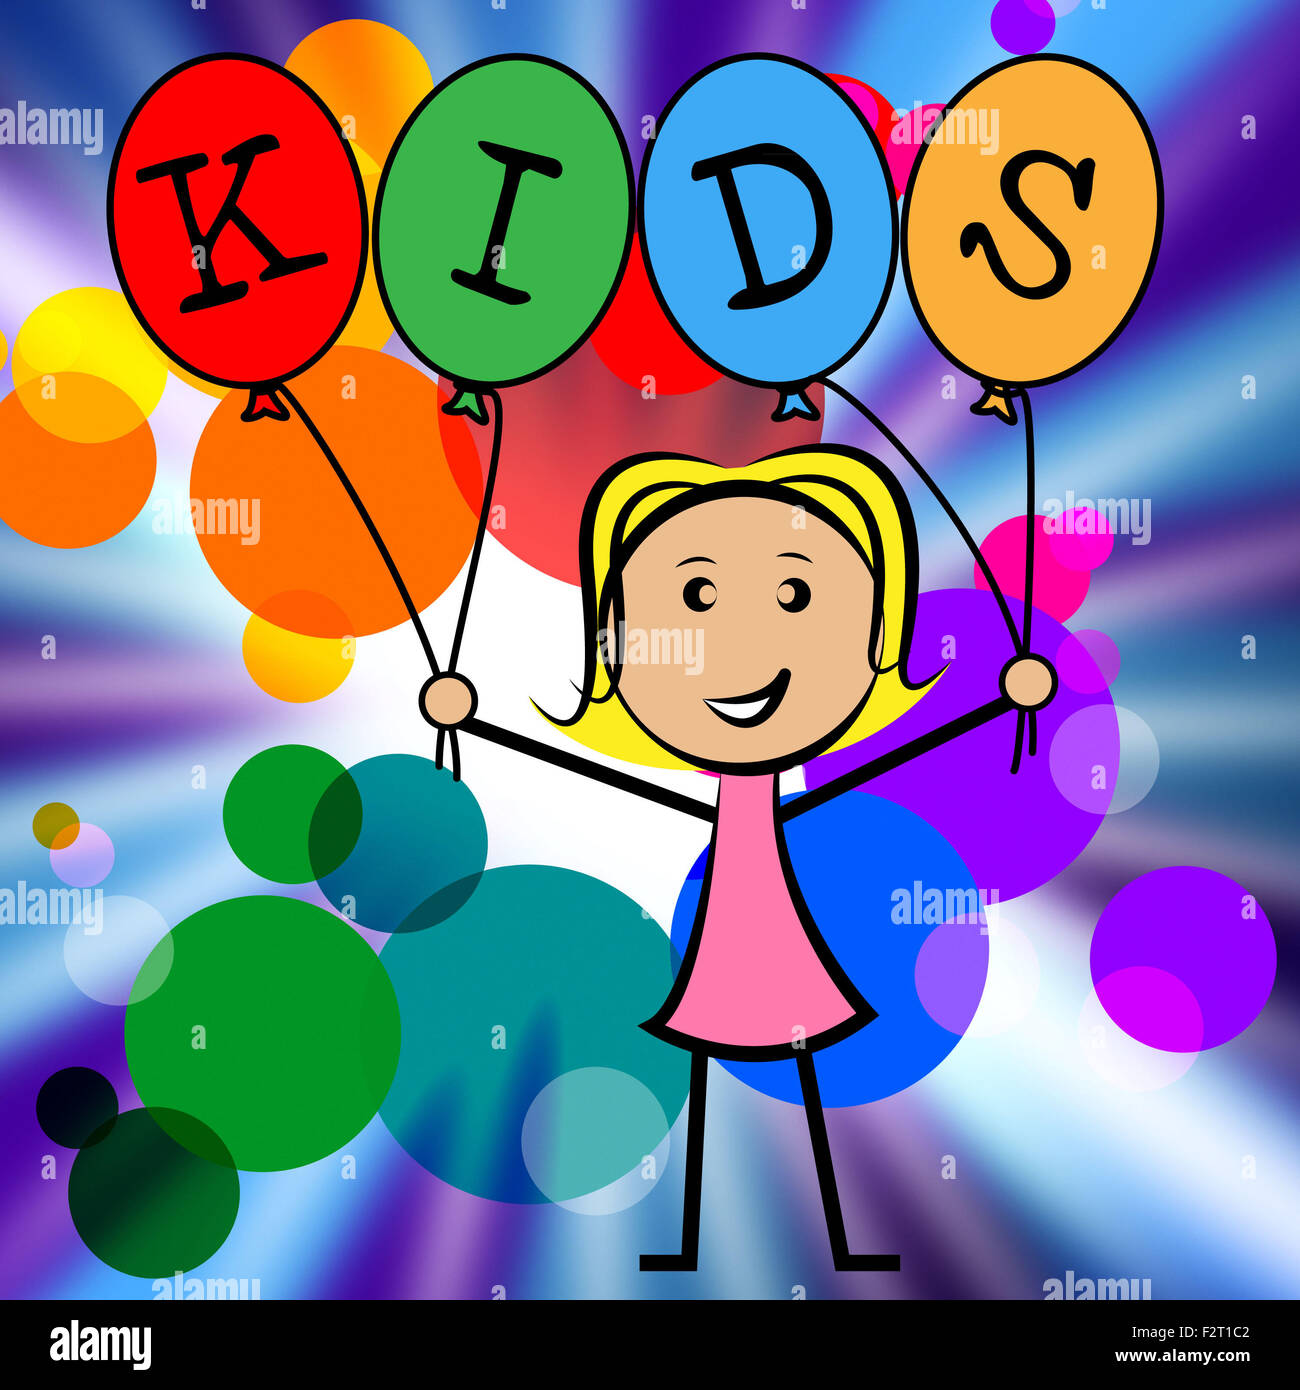 Kids Balloons Indicating Young Woman And Youngster Stock Photo